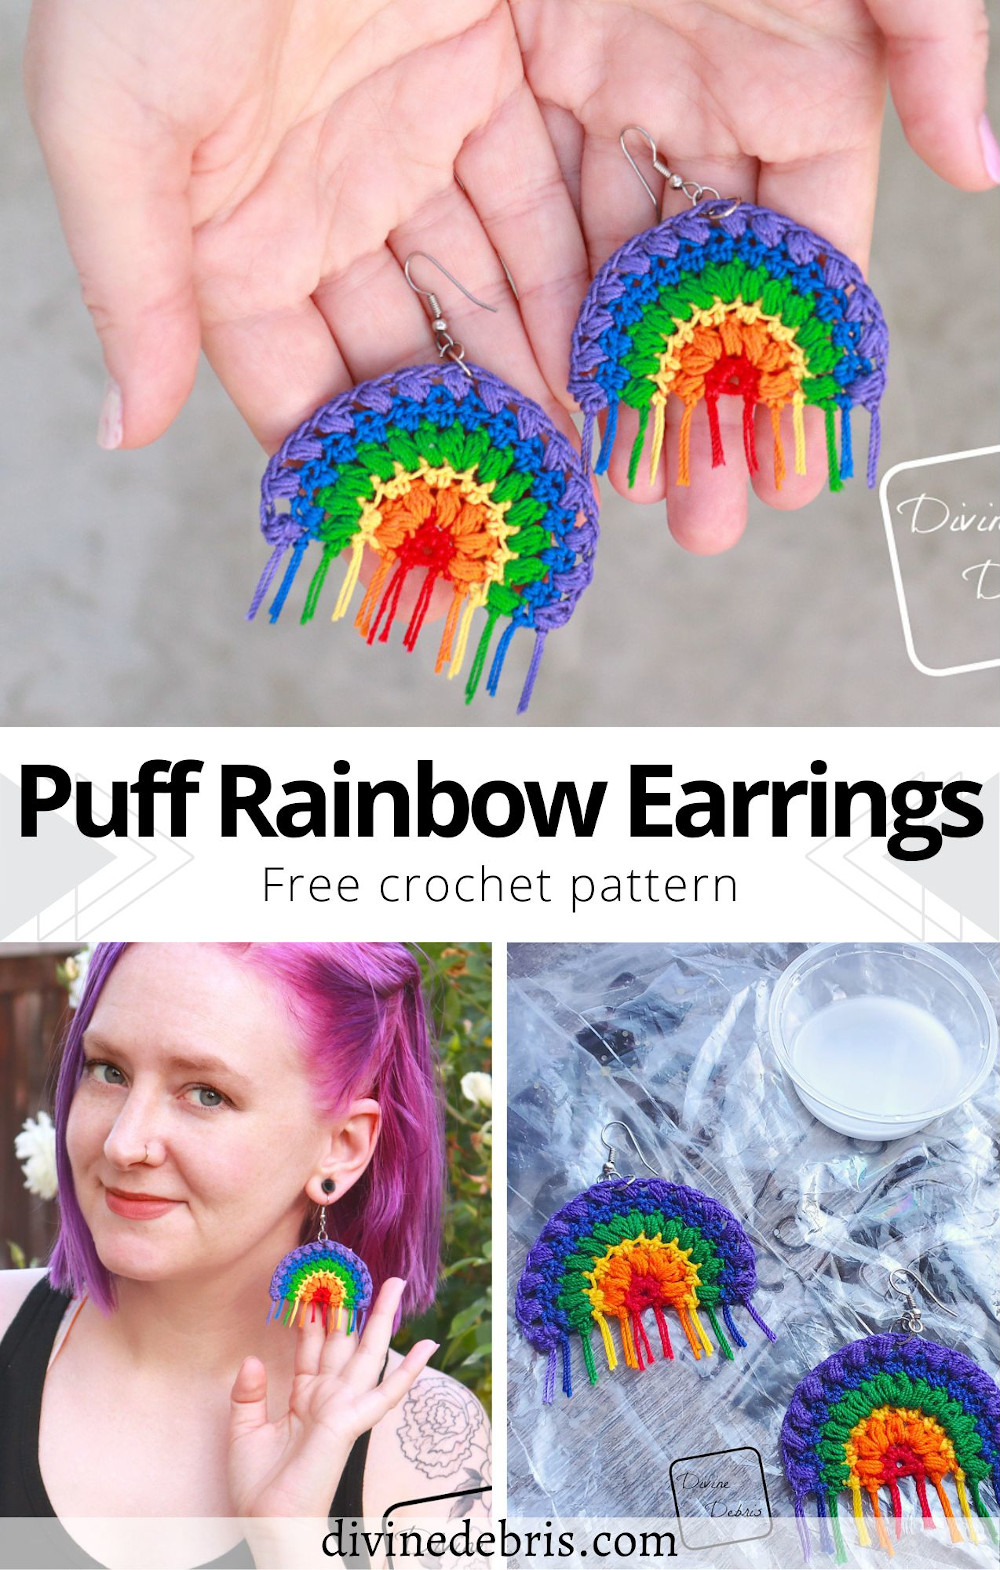 Learn to make the Puff Rainbow Earrings, an easy and fun crochet thread accessory, from a free crochet pattern photo tutorial on DivineDebris.com